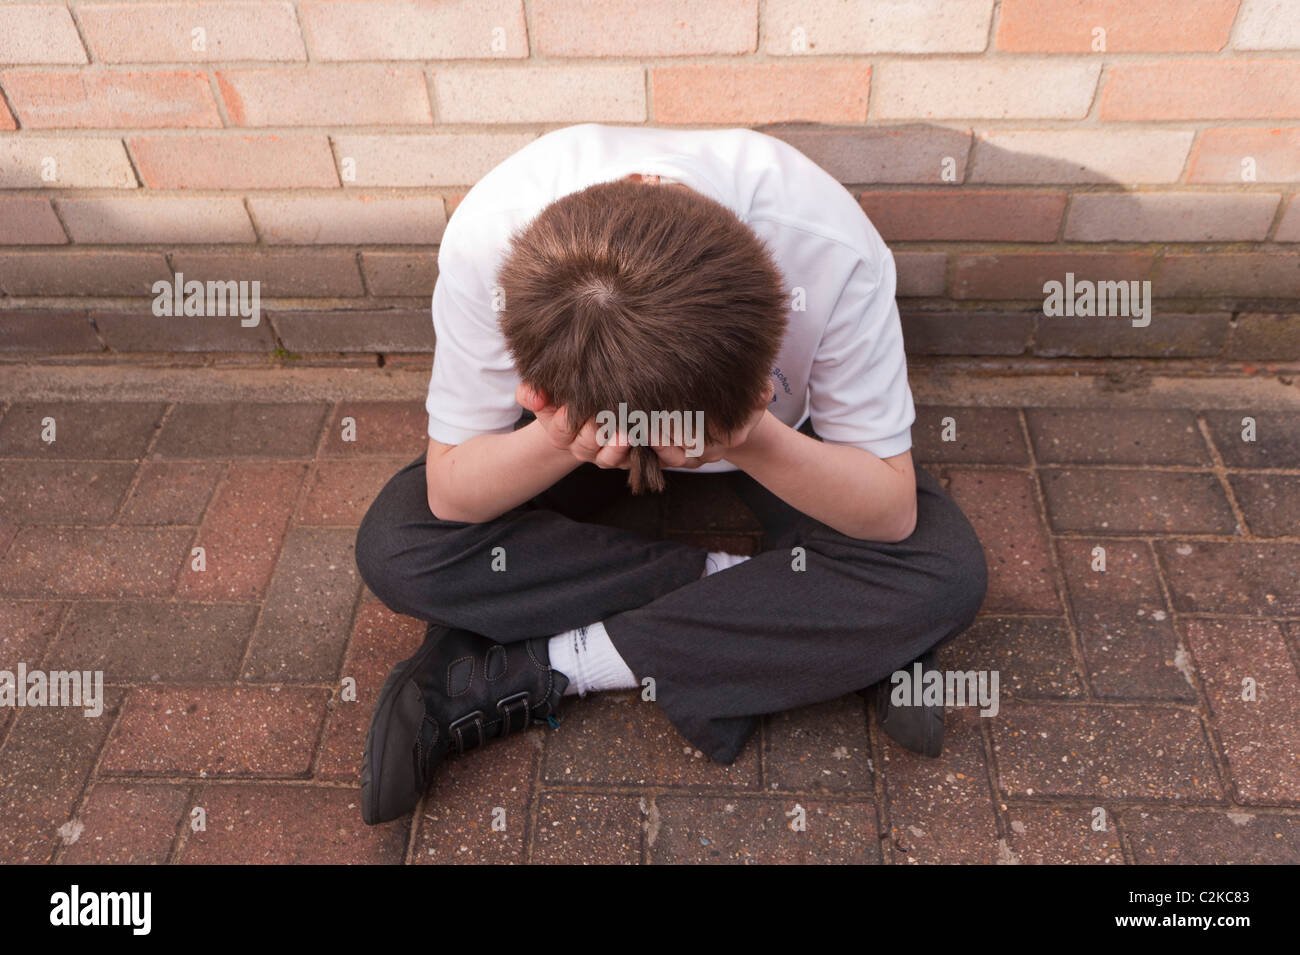 A MODEL RELEASED picture of an eleven year old boy looking depressed outdoors wearing his school uniform in the Uk Stock Photo